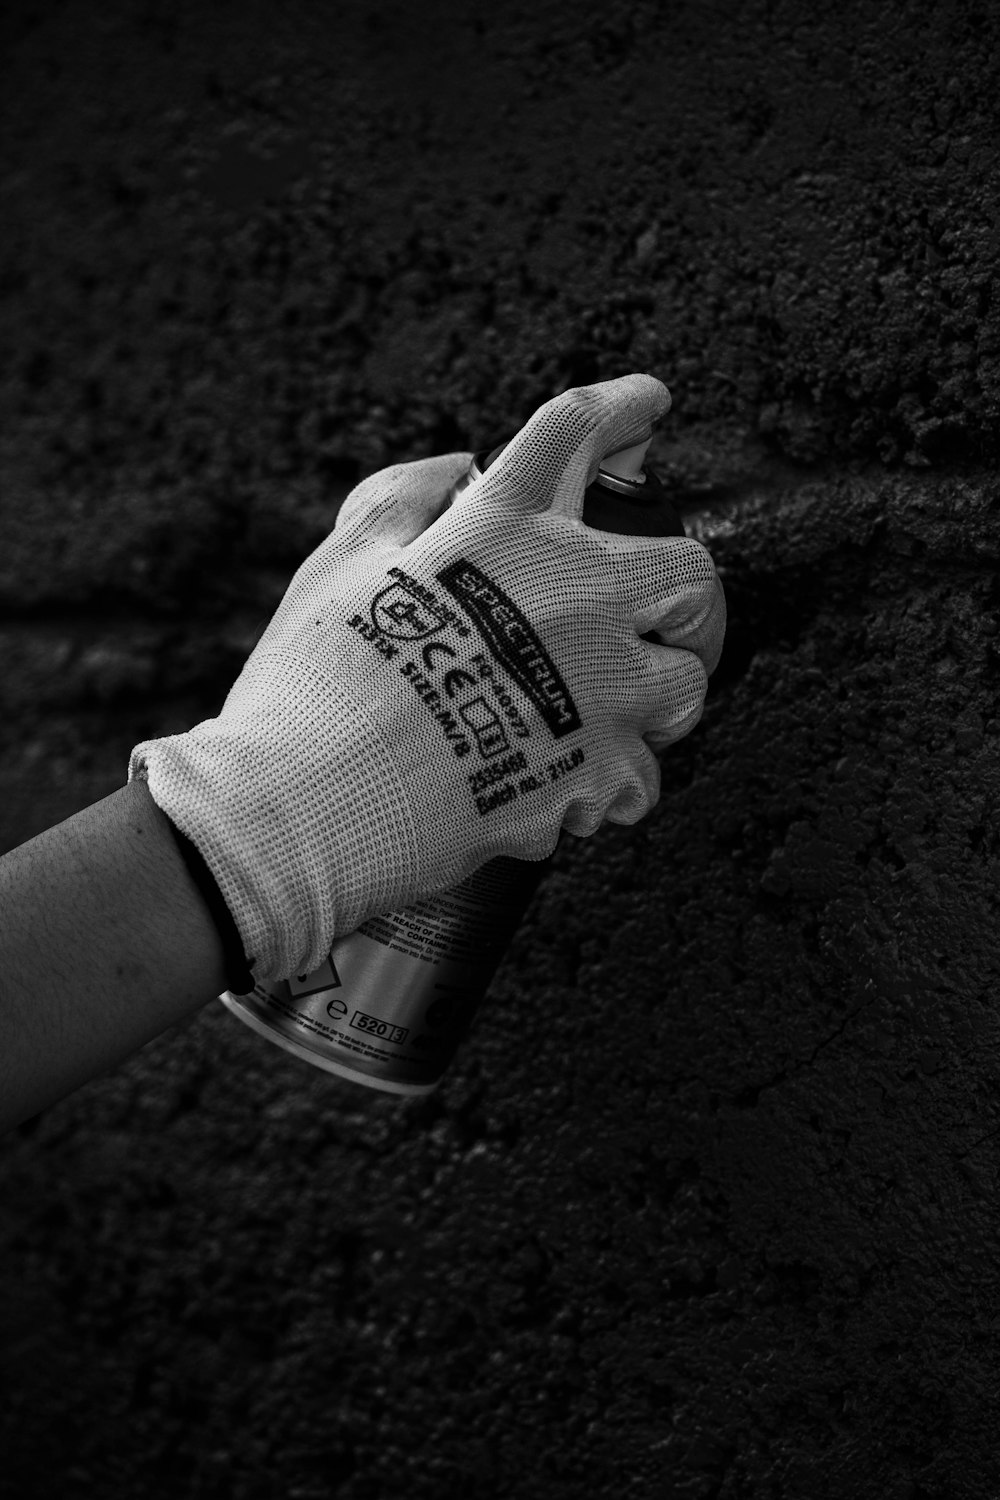 a black and white photo of a person's hand wearing a glove